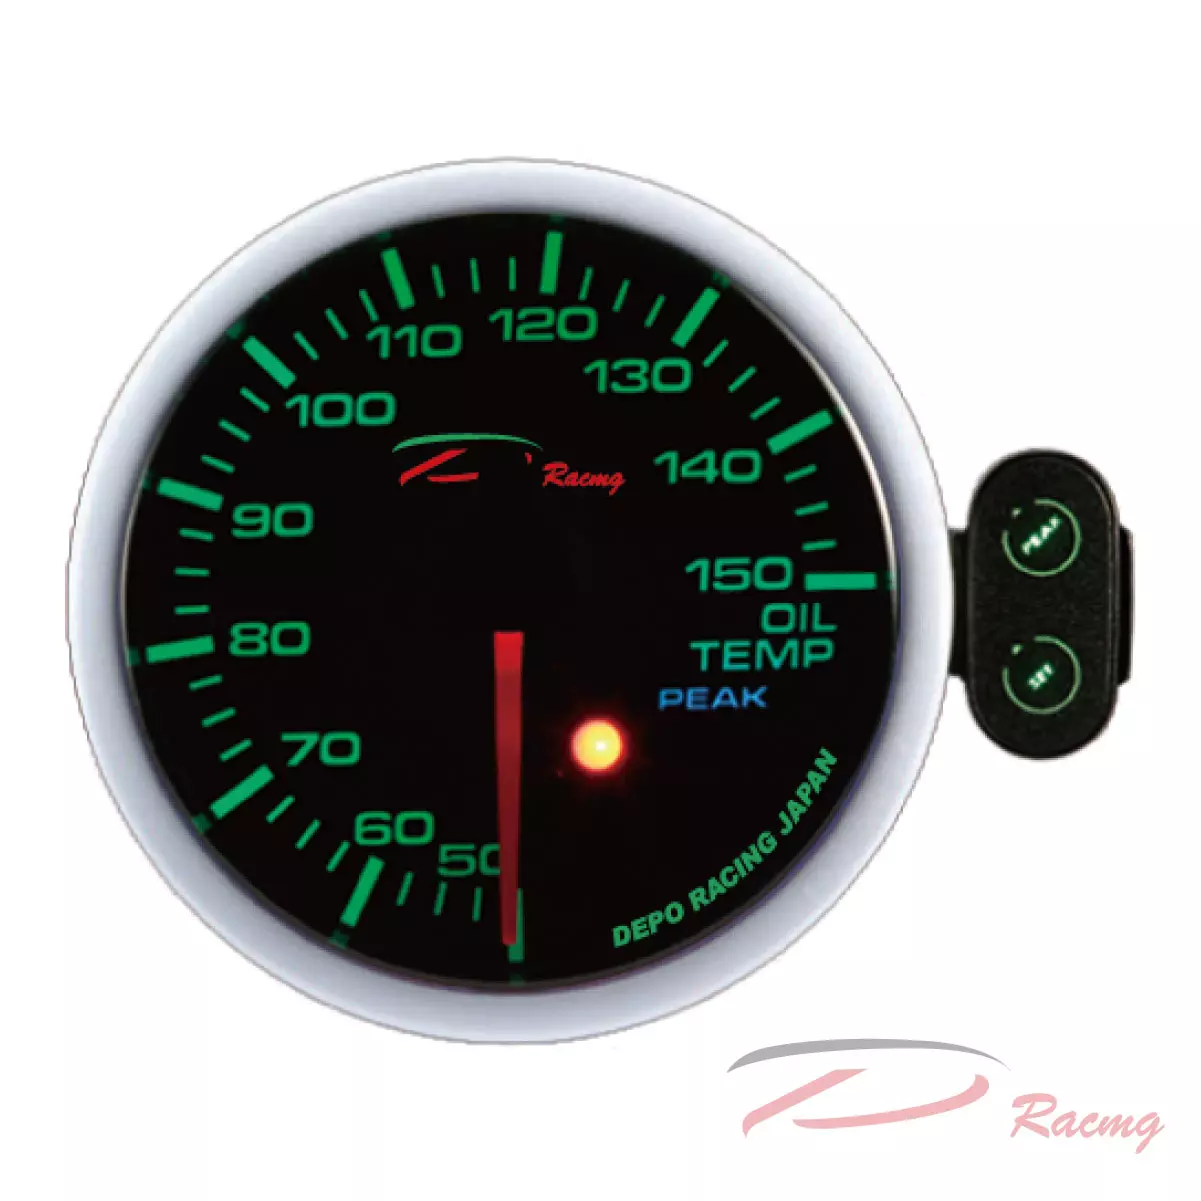 Dracing, Depo racing, AutoMeter, performance oil temperature gauges, oil temperature gauges, accurate oil temperature gauges, durable oil temperature gauges, professional oil temperature gauges, ultra-lite oil temperature gauges, sport-comp oil temperature gauges, cobalt oil temperature gauges, carbon fiber oil temperature gauges, car oil temperature gauges, truck oil temperature gauges, racing oil temperature gauges, suv oil temperature gauges, motorcycle oil temperature gauges, Fahrenheit oil temperature gauges, Celsius oil temperature gauges, 2-1/16" oil temperature gauges, 2-5/8" oil temperature gauges, mechanical oil temperature gauges, digital-stepper motor oil temperature gauges, air-core oil temperature gauges, analog oil temperature gauges, digital oil temperature gauges